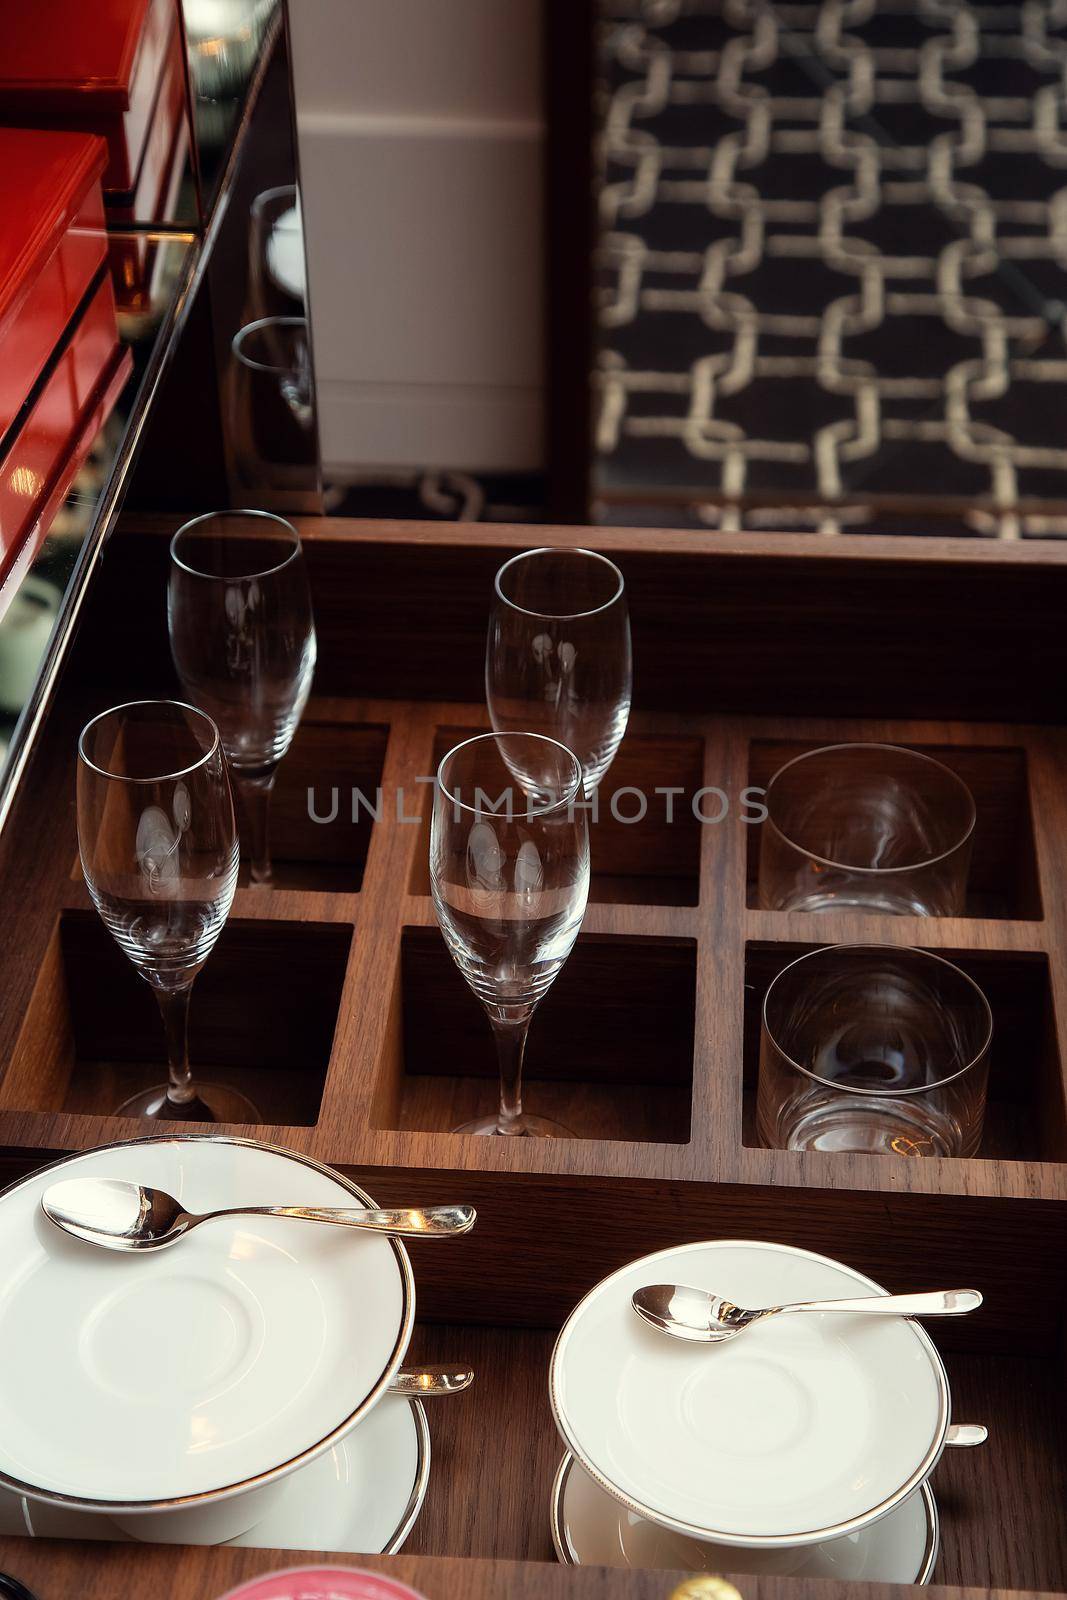 Pull-out drawer filled with glass wine glasses, cups, saucers and spoons.